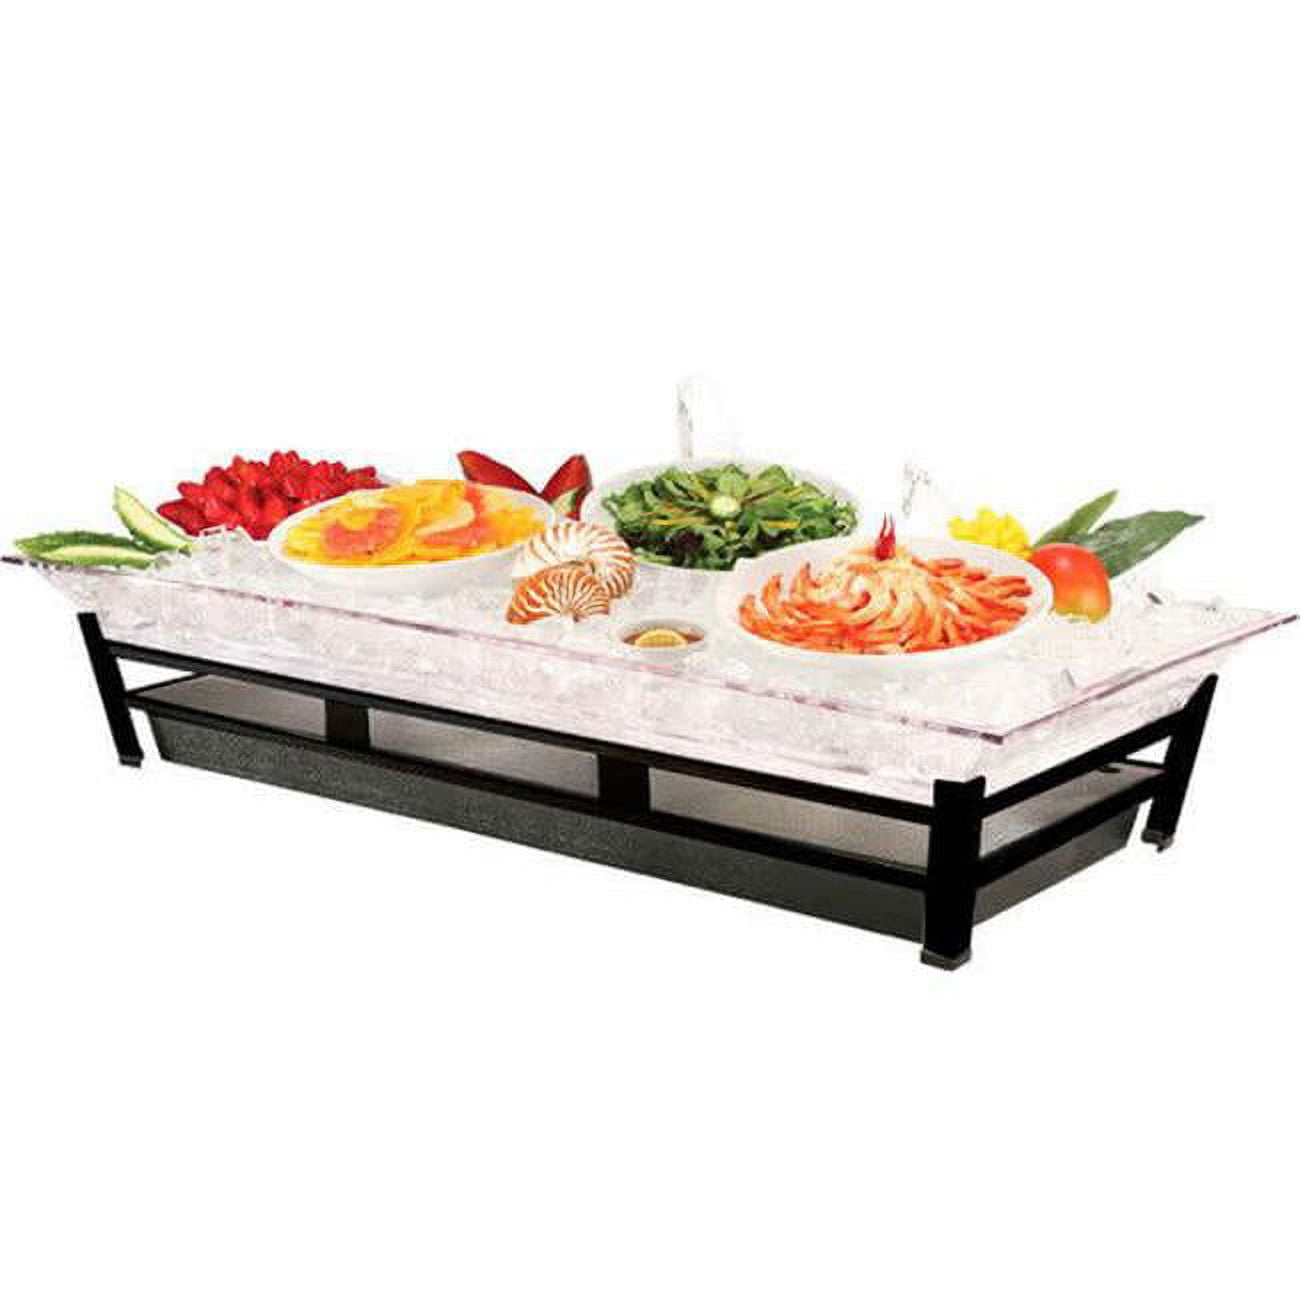 Picture of Cal Mil IP2020-13 24 x 48 in. Large Black Ultimate Ice Housing Display with LED